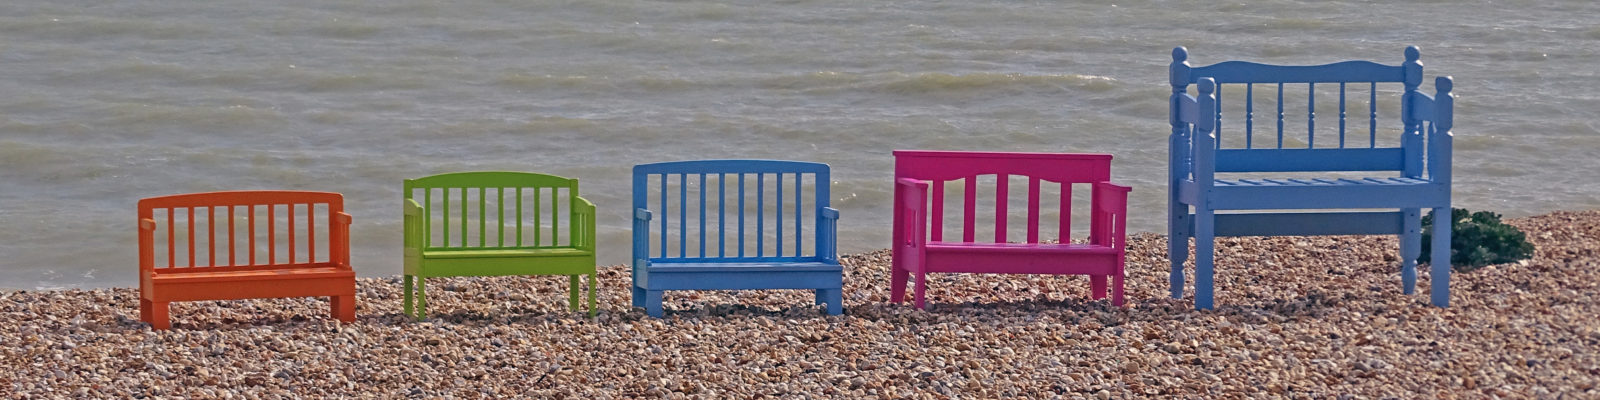 bright upcycled benches by the sea